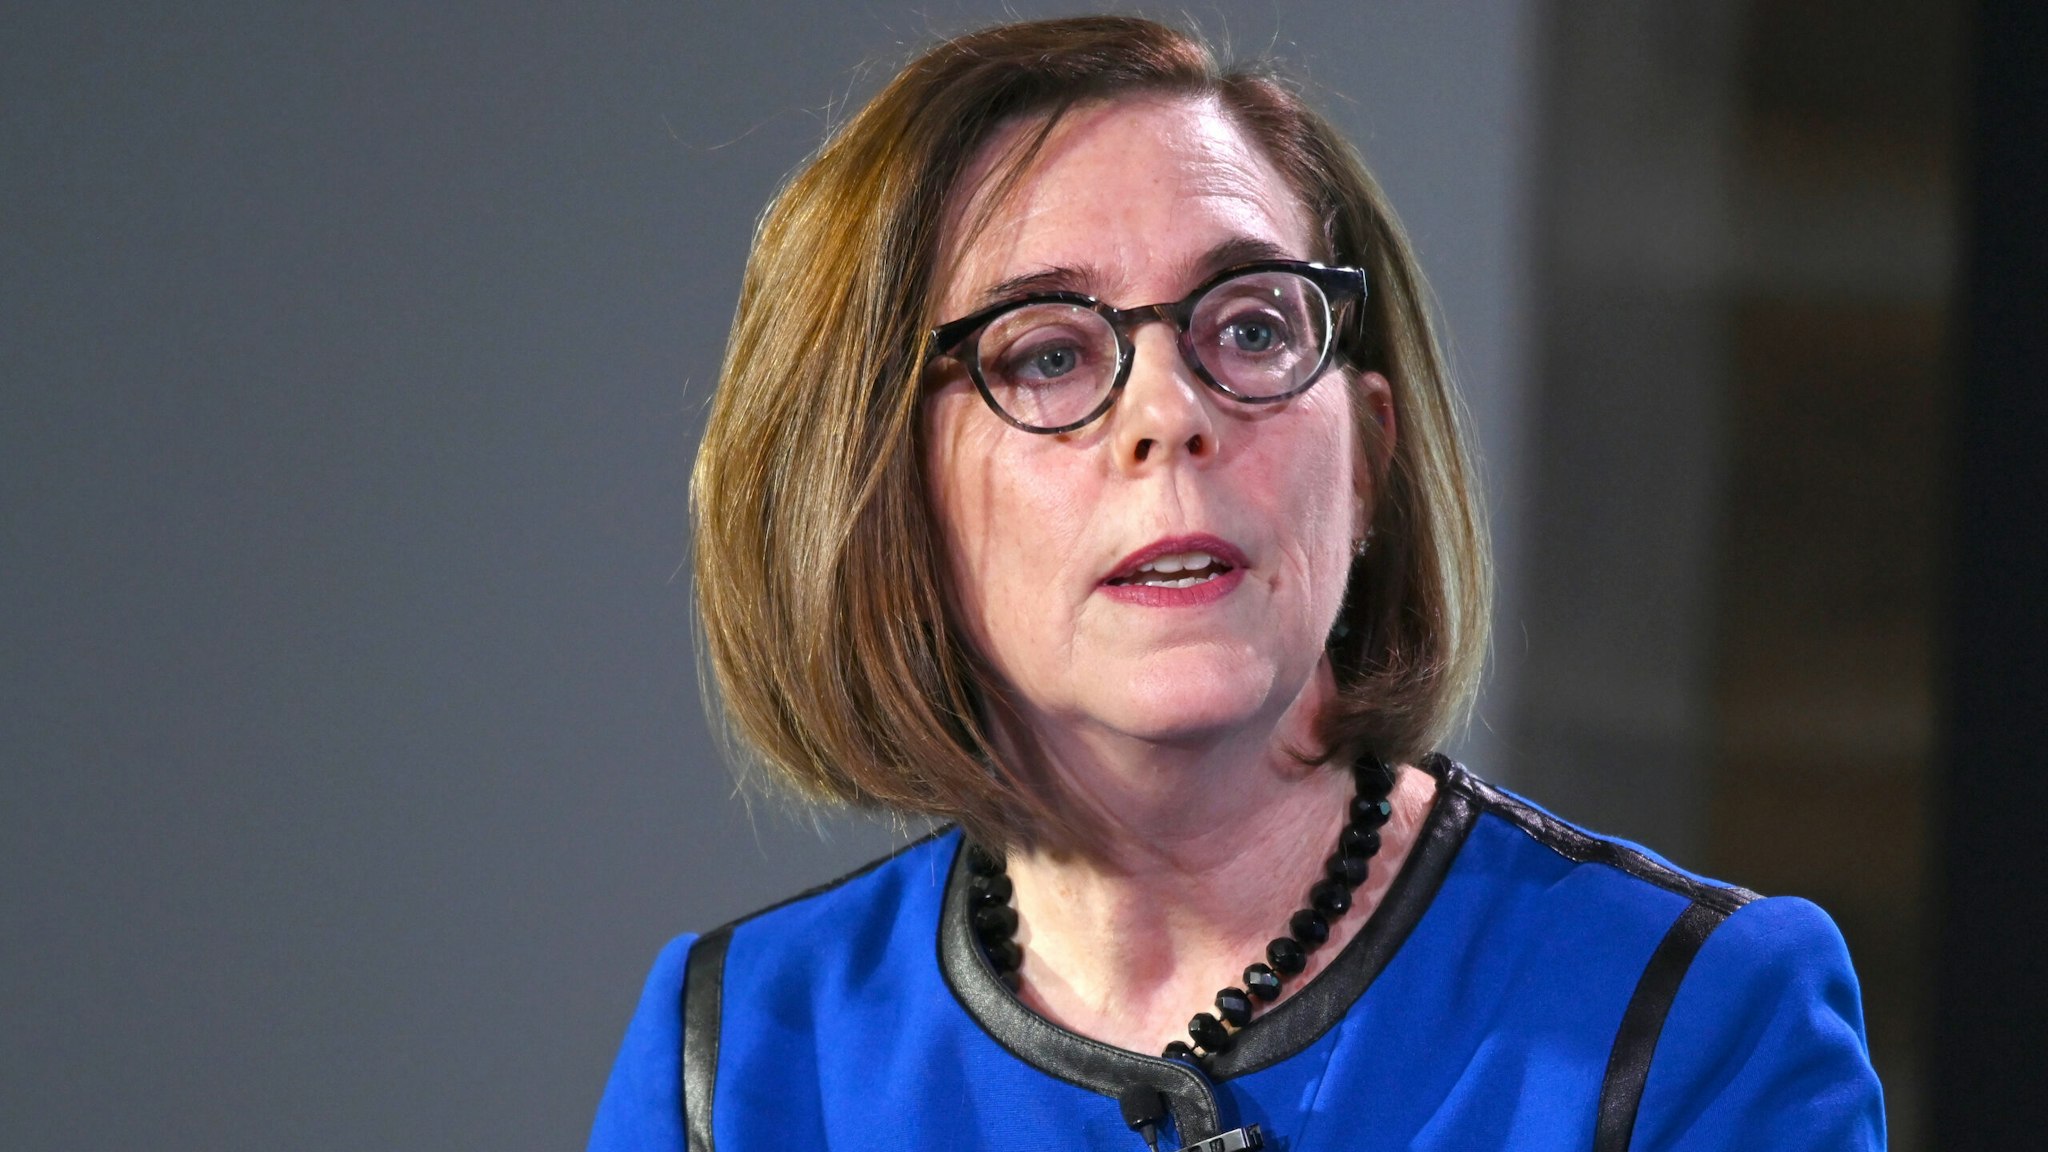 Oregon Governor Kate Brown speaks at the Axios News Shapers event on the U.S. education system on February 22, 2019 in Washington, DC.